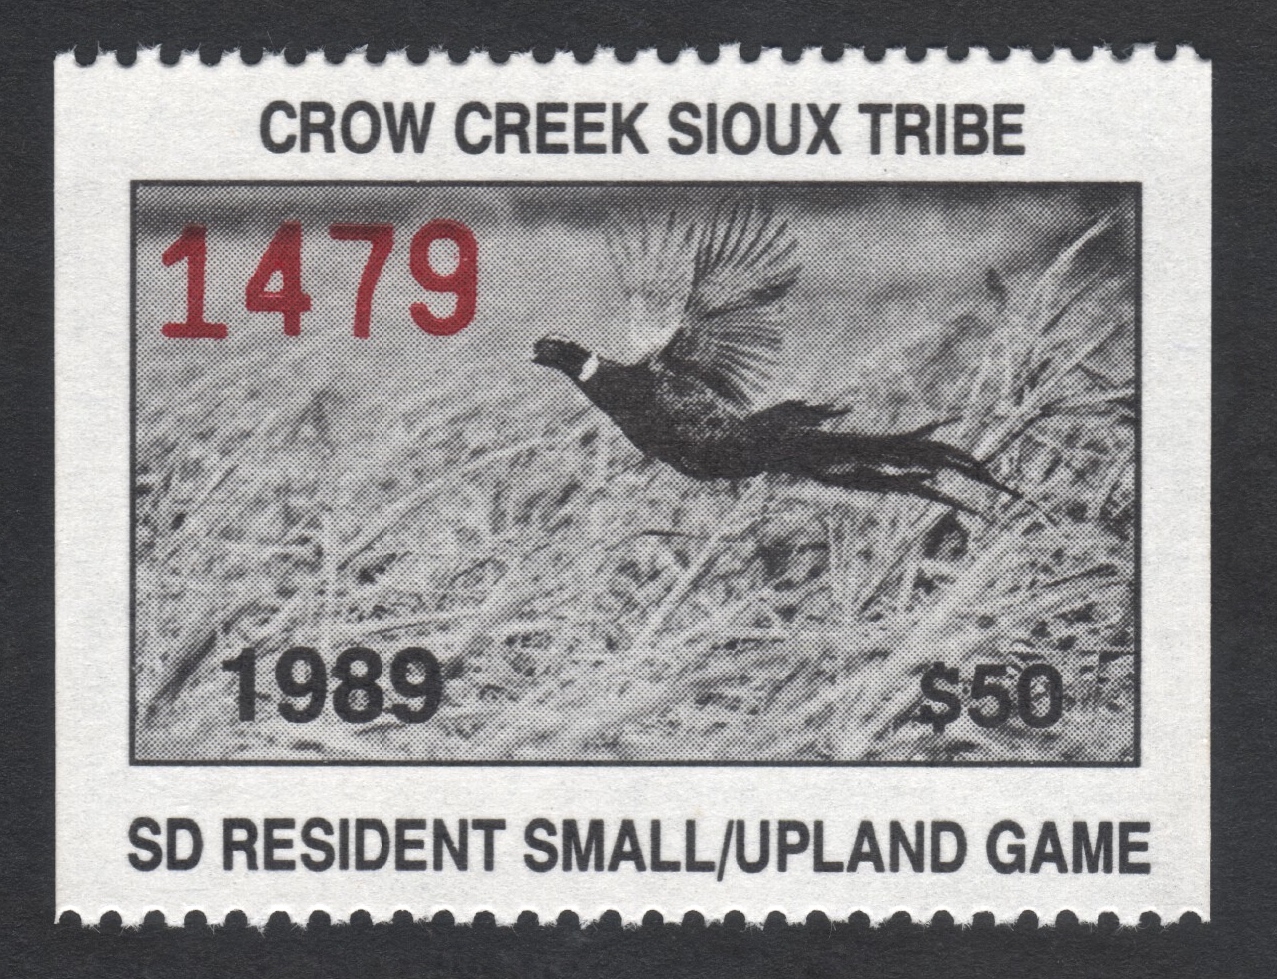 1989 Crow Creek Resident Small/Upland Game